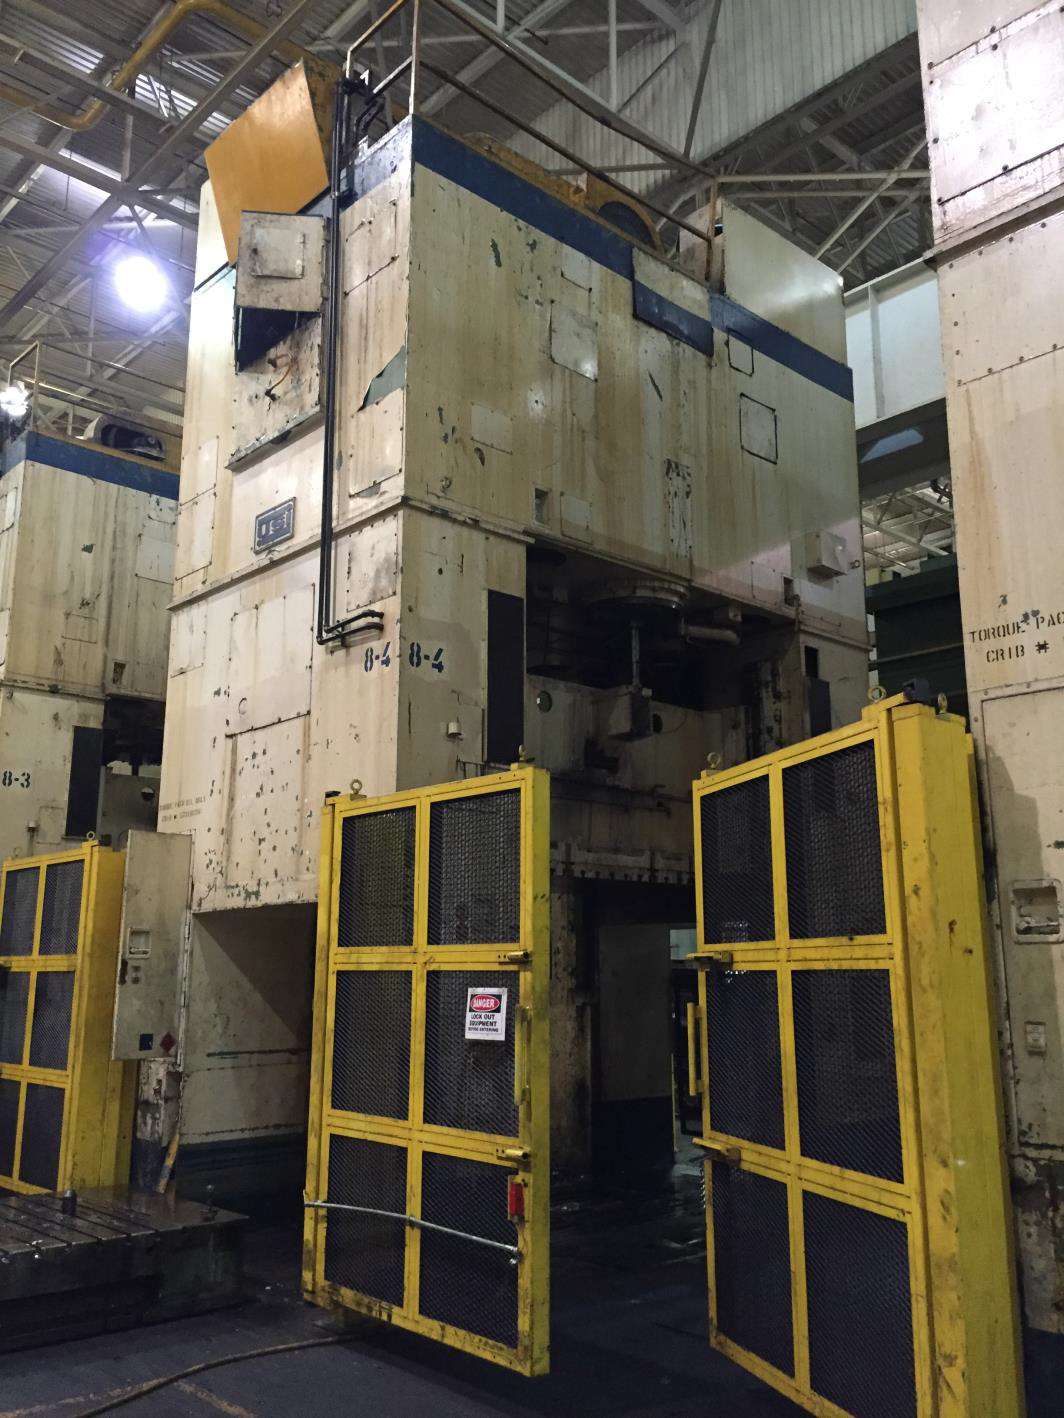 800 Ton Capacity USI/Clearing Press Line For Sale (4 Available)